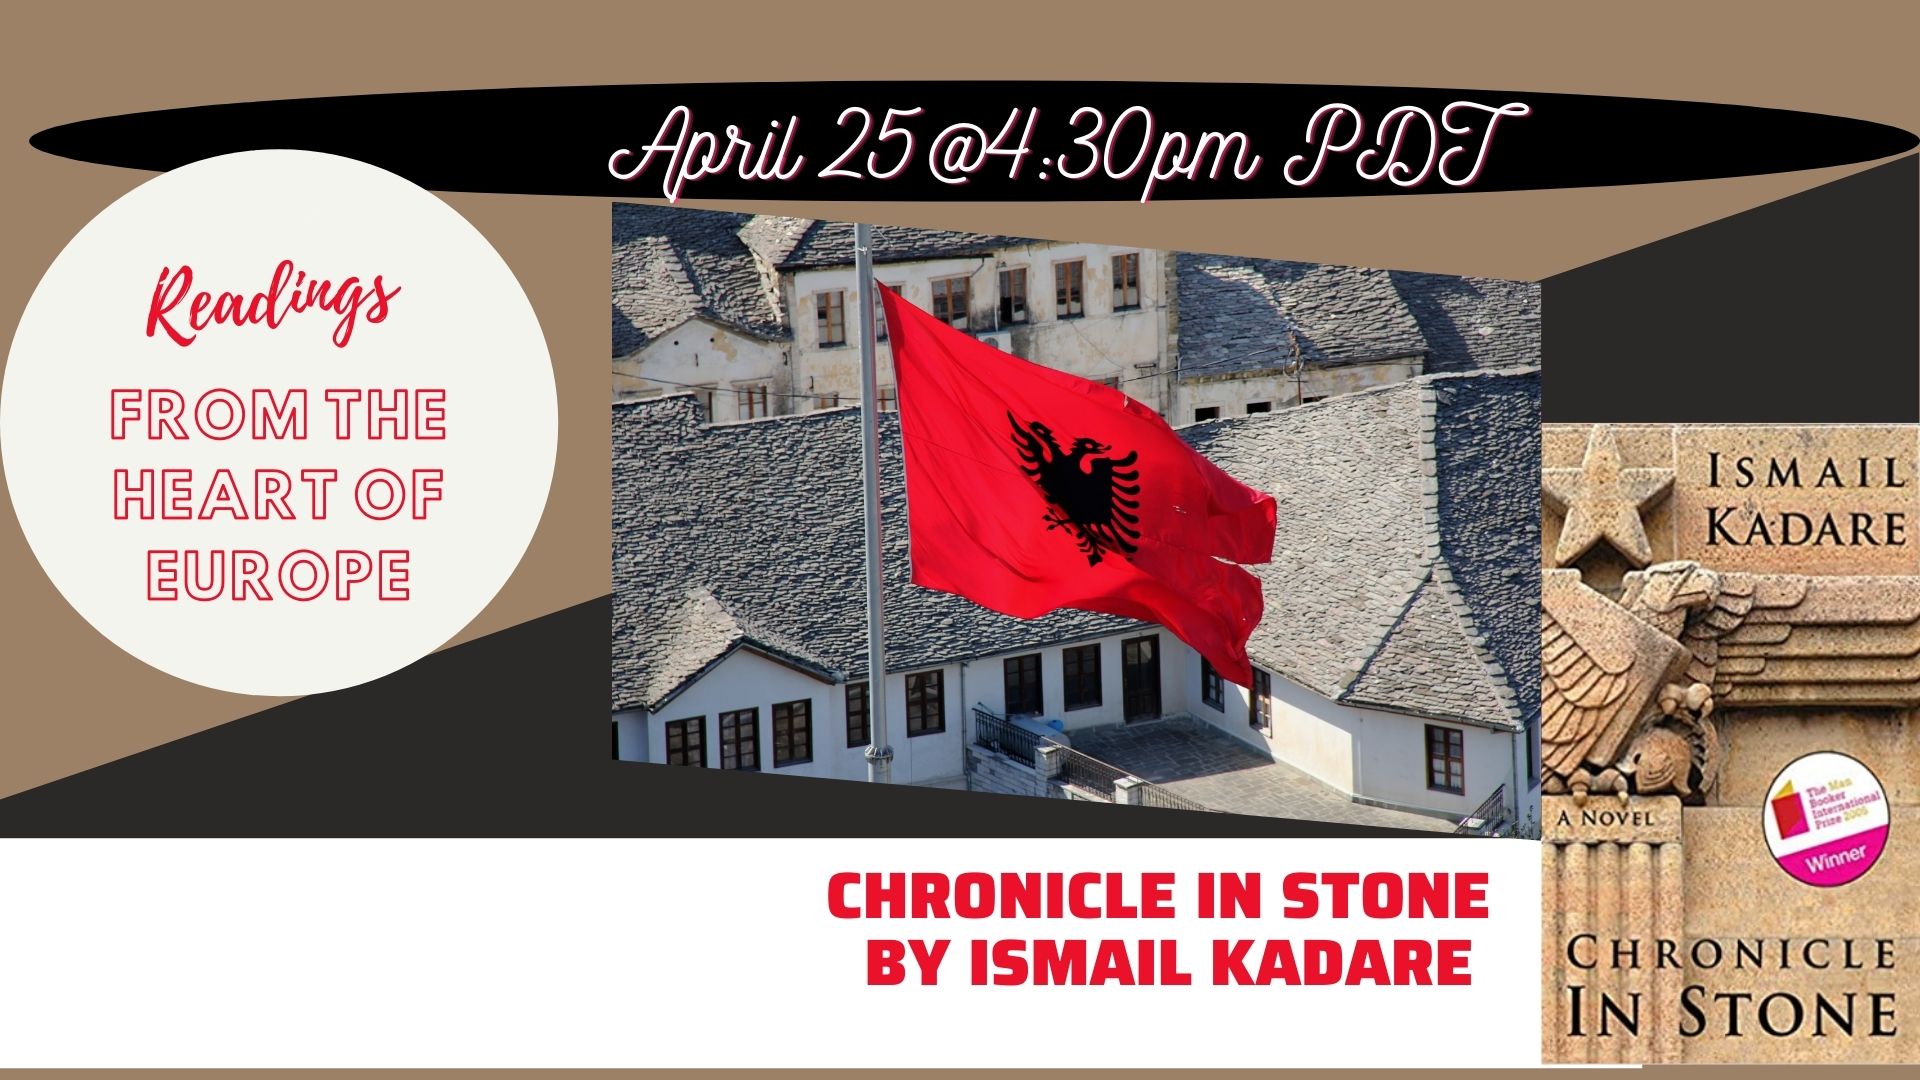 Chronicle in Stone, by Ismail Kadare